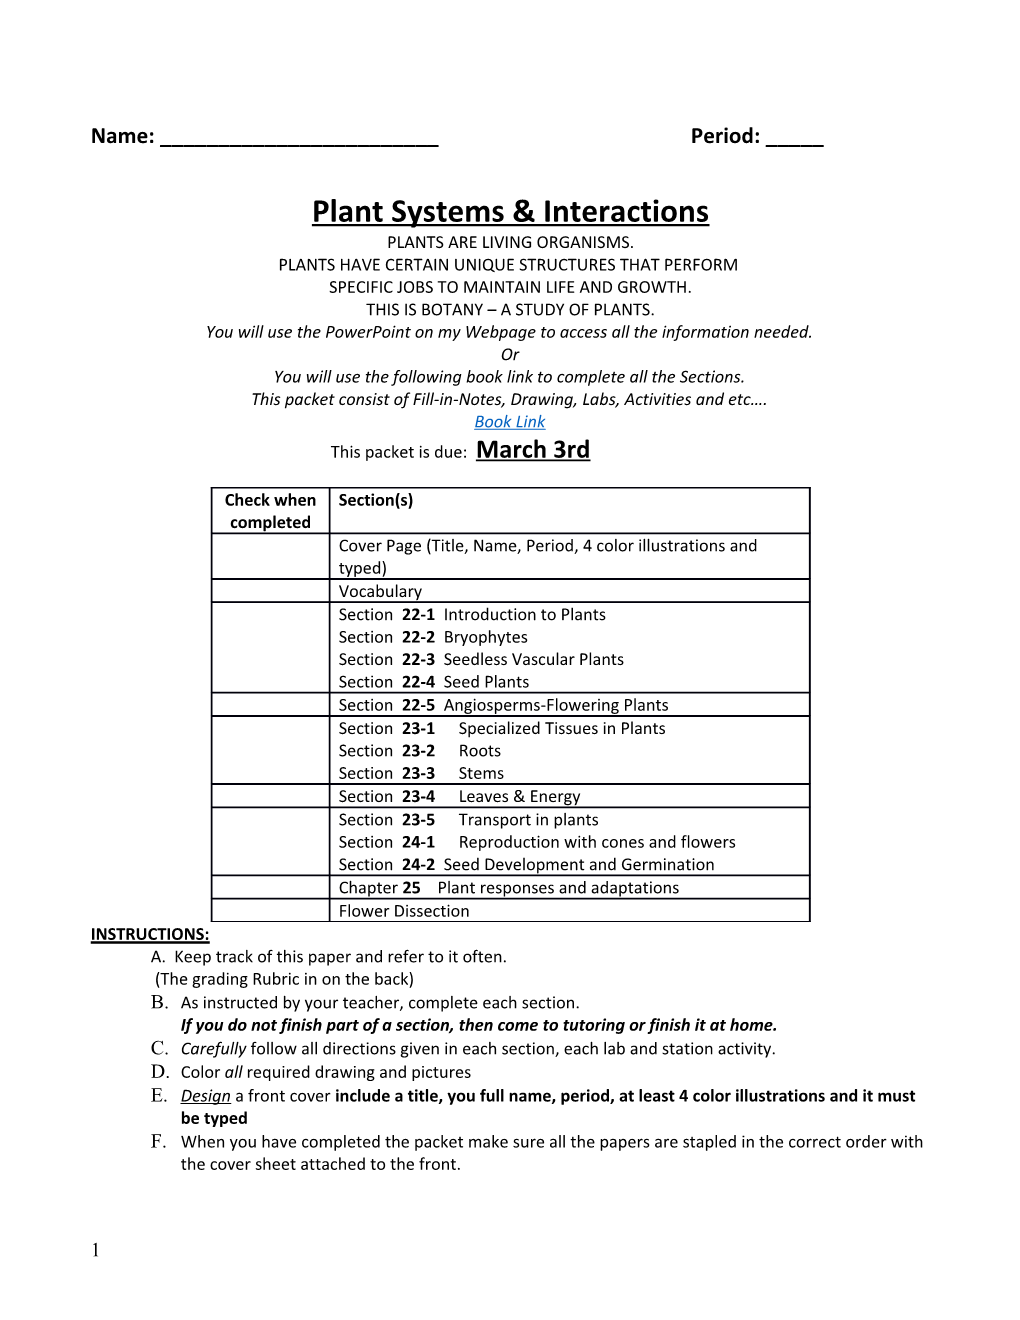 Plant Systems & Interactions